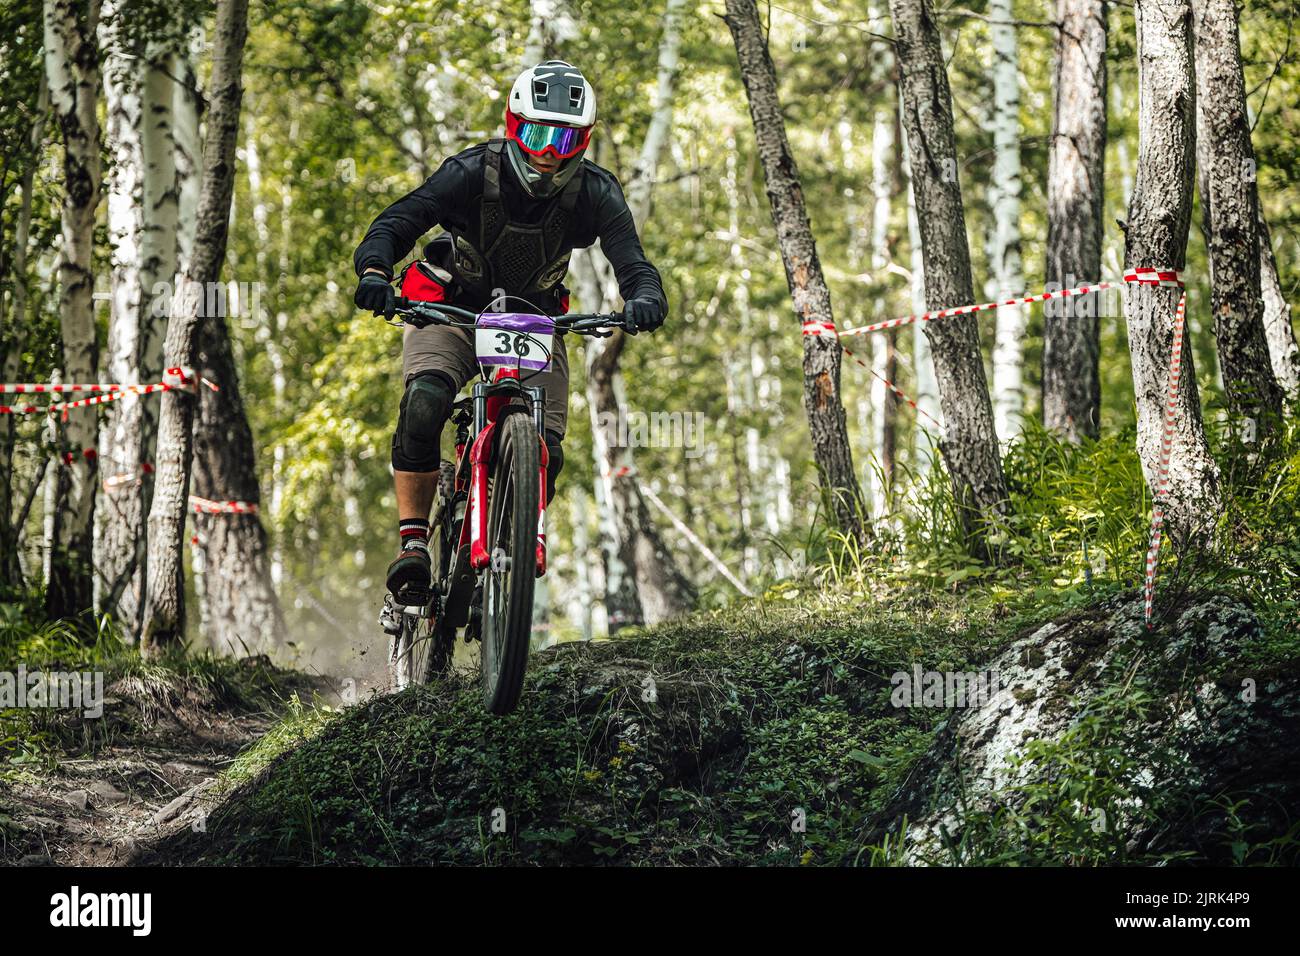 athlete rider downhill forest trail race Stock Photo